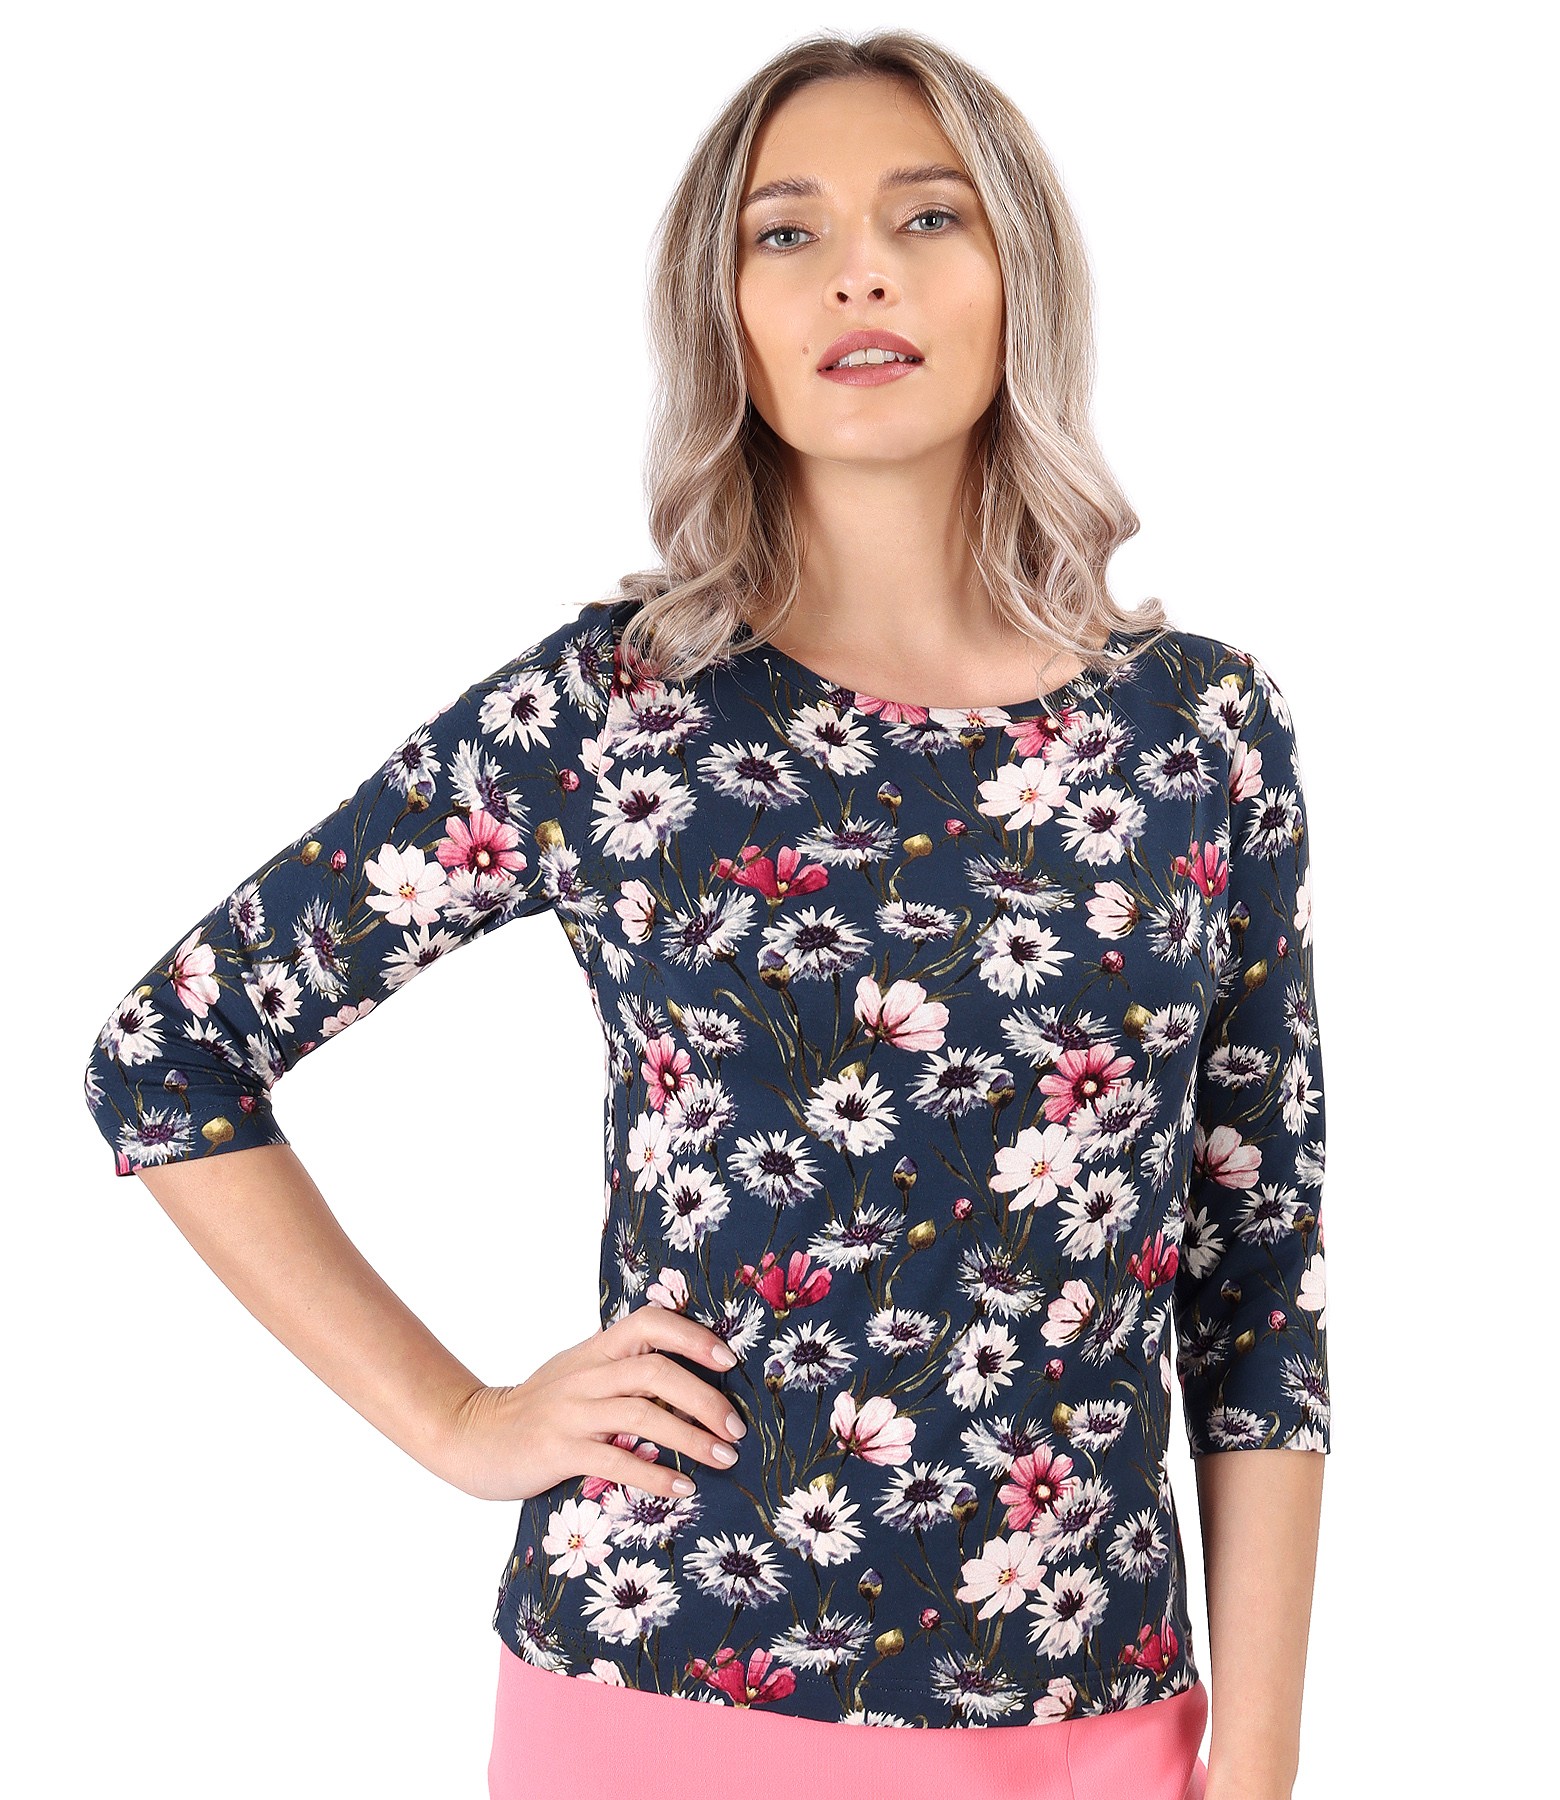 Elastic jersey blouse printed with floral motifs navy blue - YOKKO